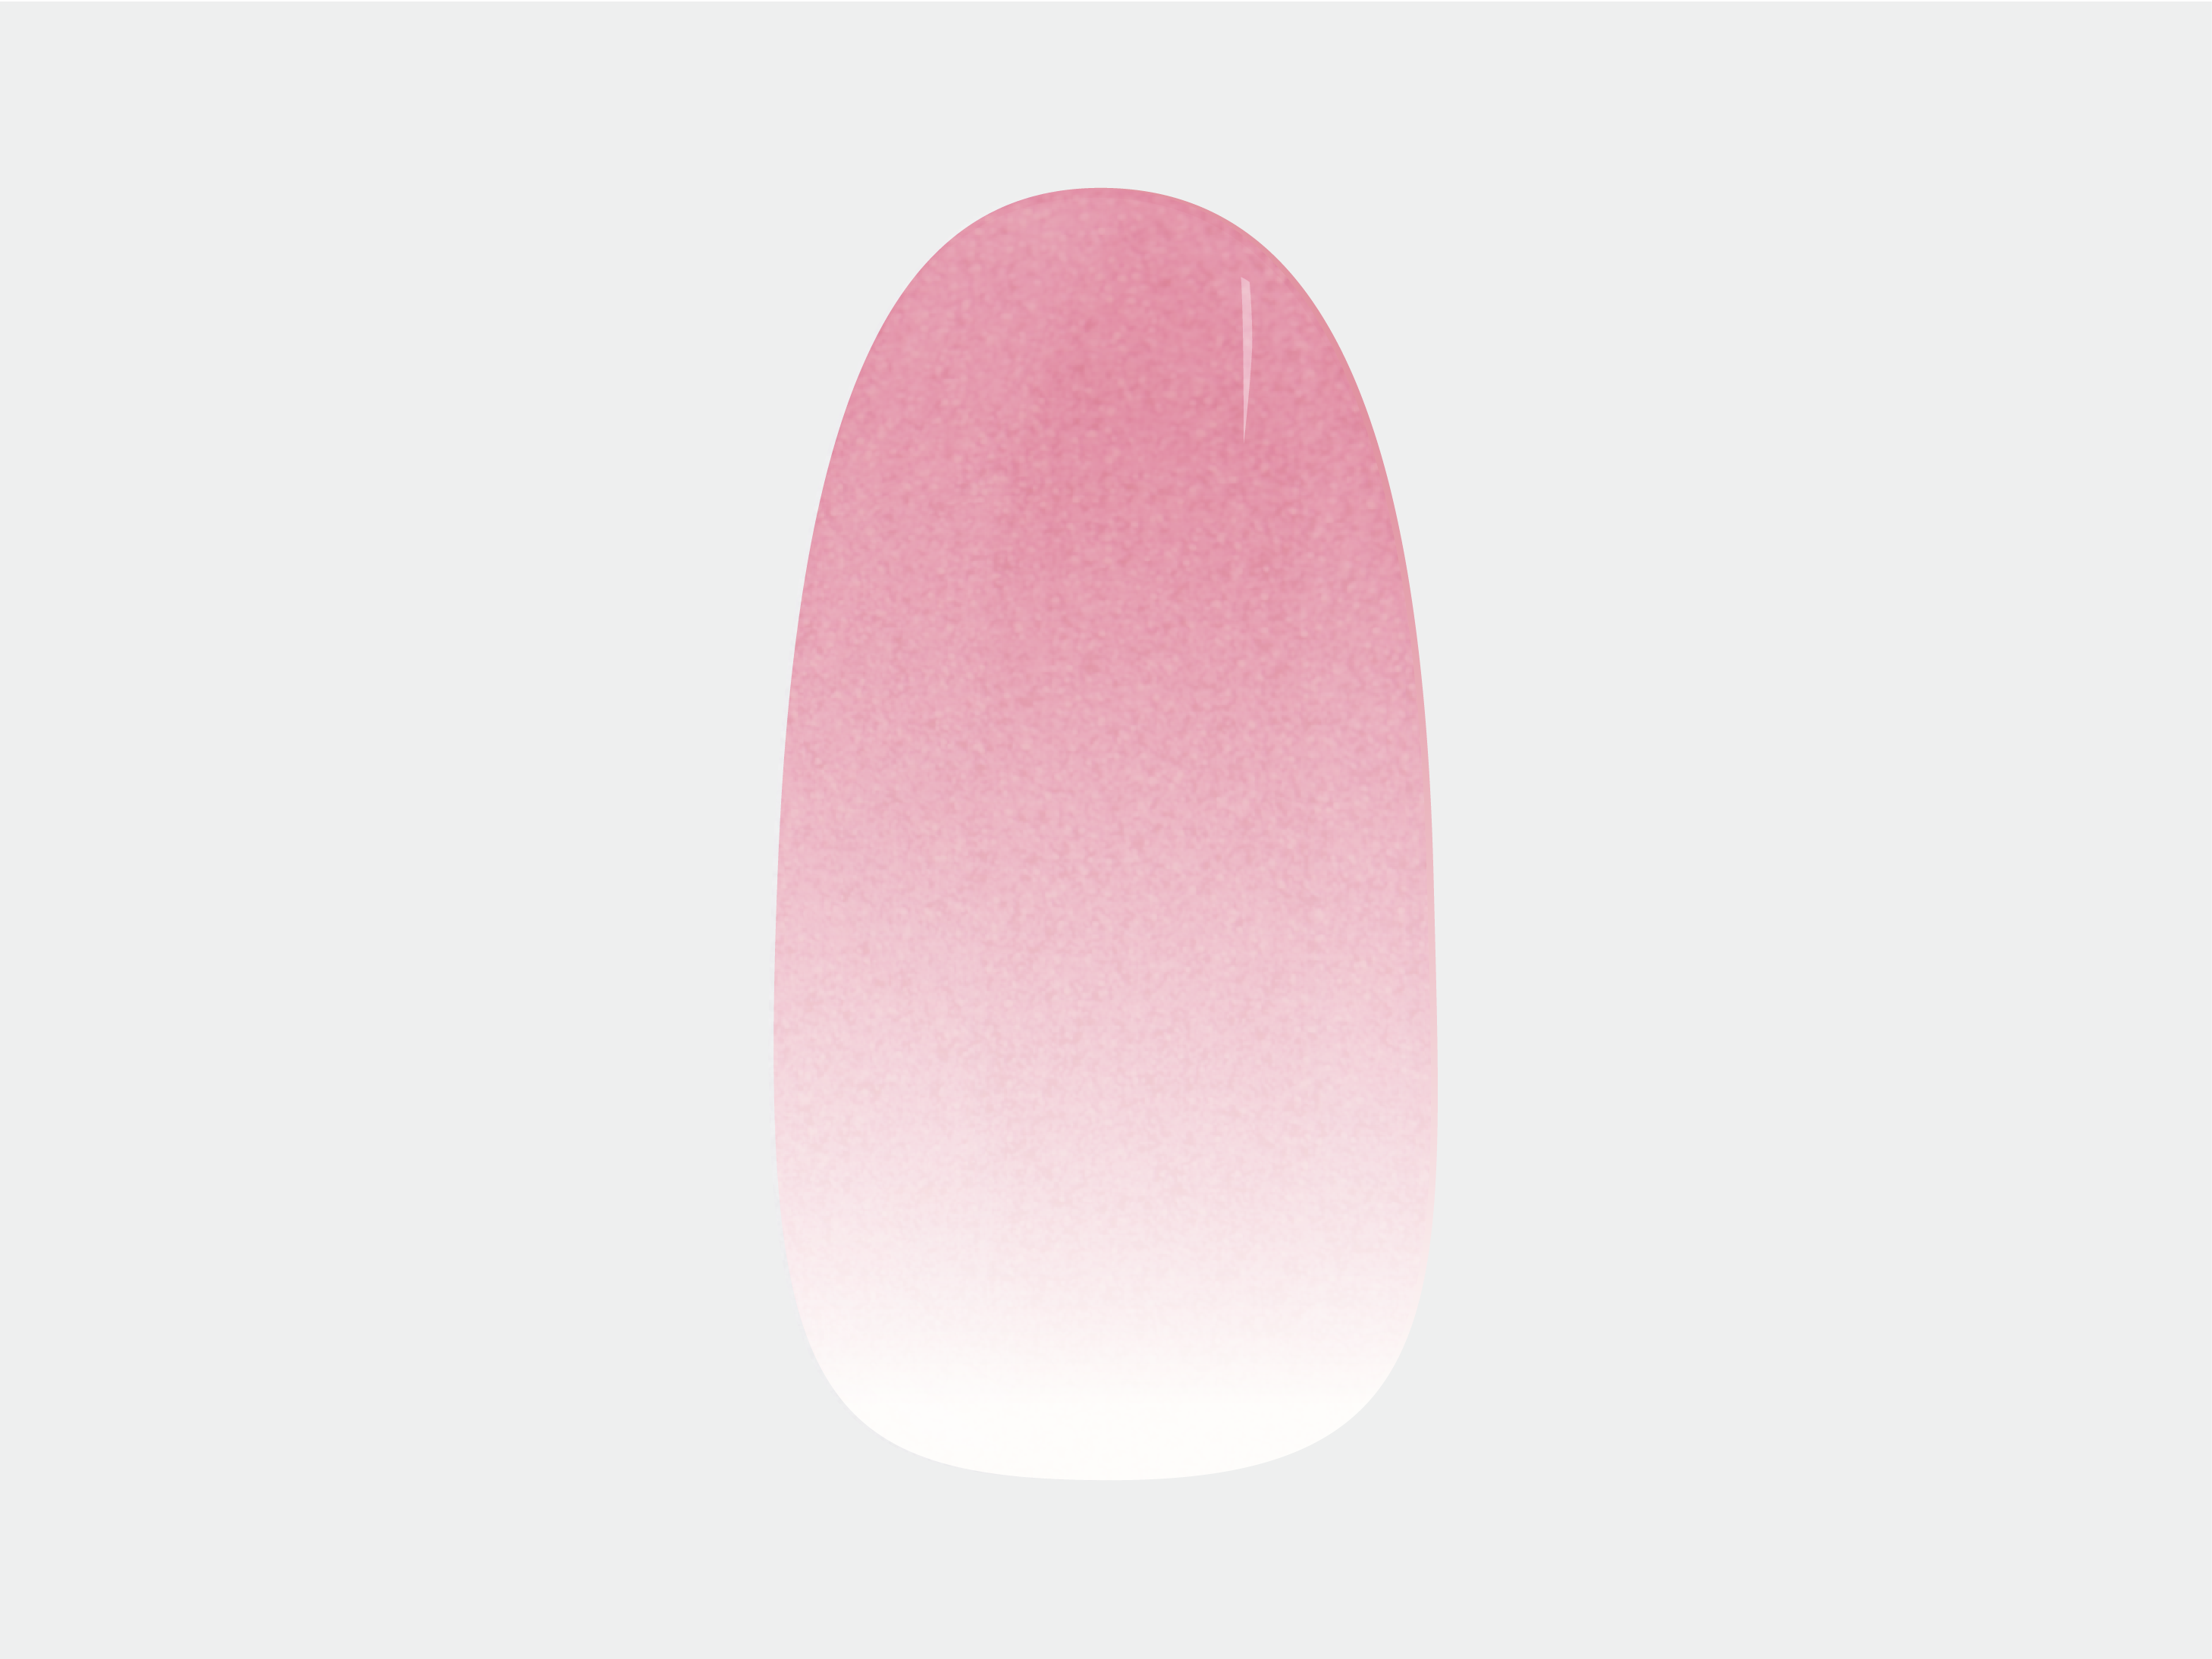 Cotton Candy Maniac Nails Gellak Stickers Ombre Pink and white Manicure Product Image 